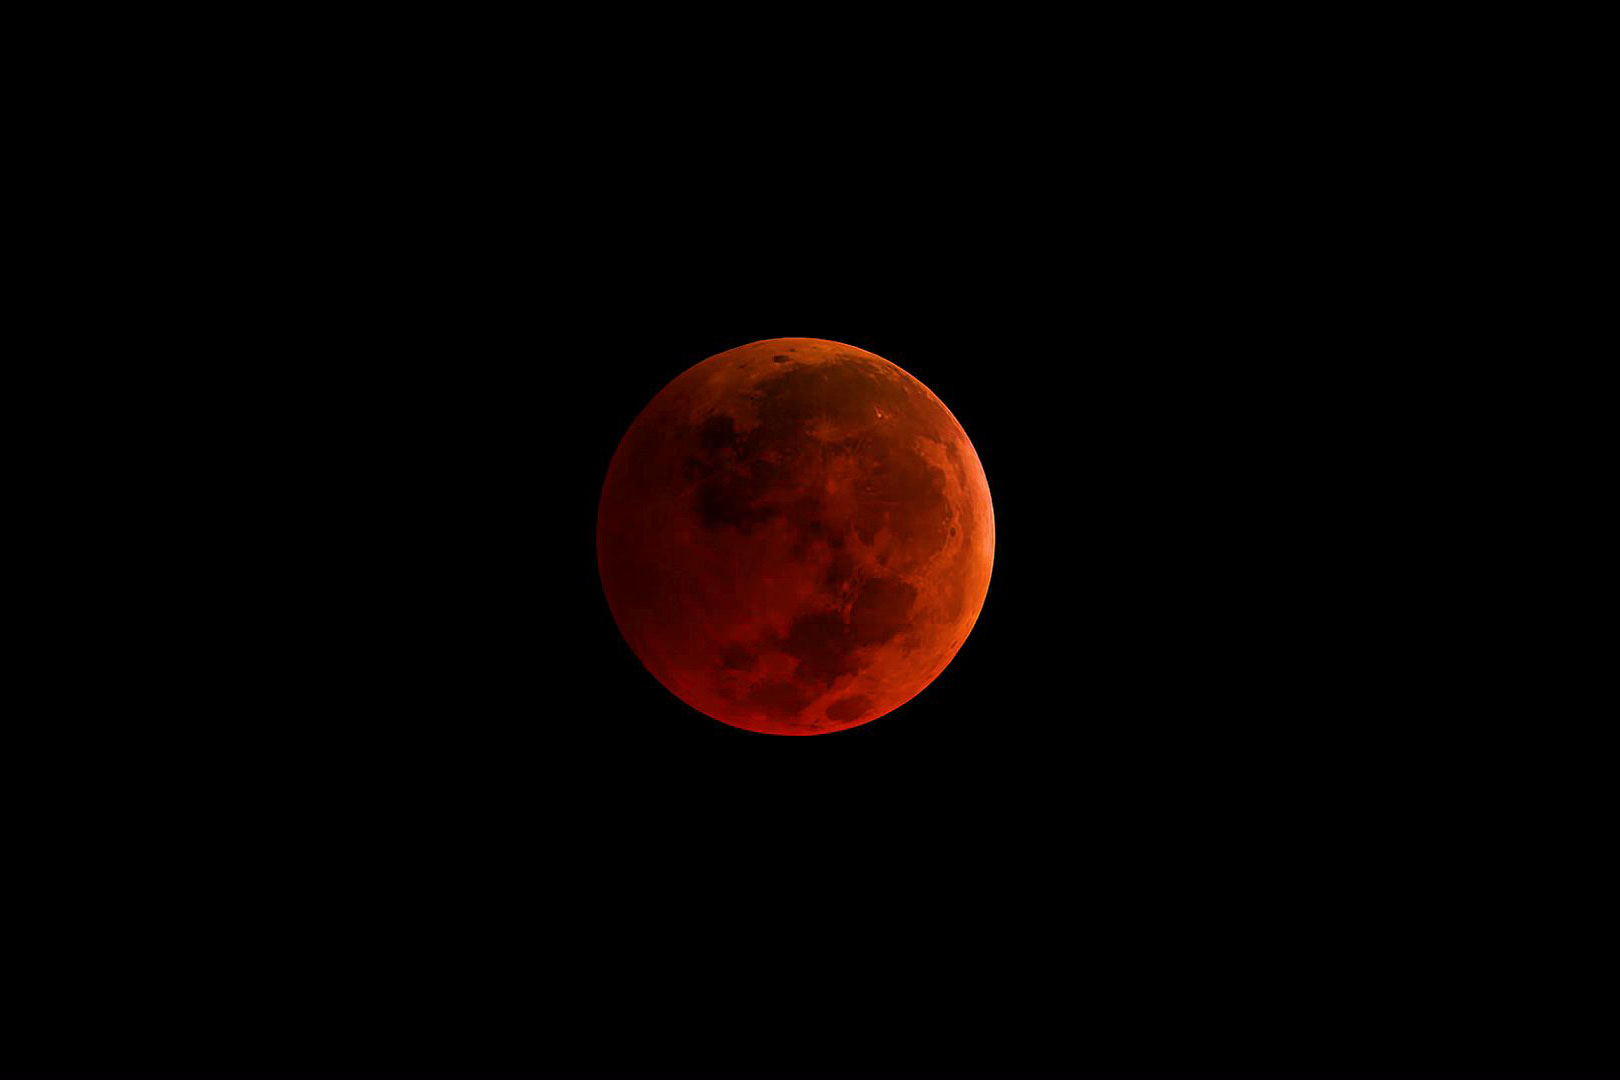 View of the moon during a total lunar eclipse.